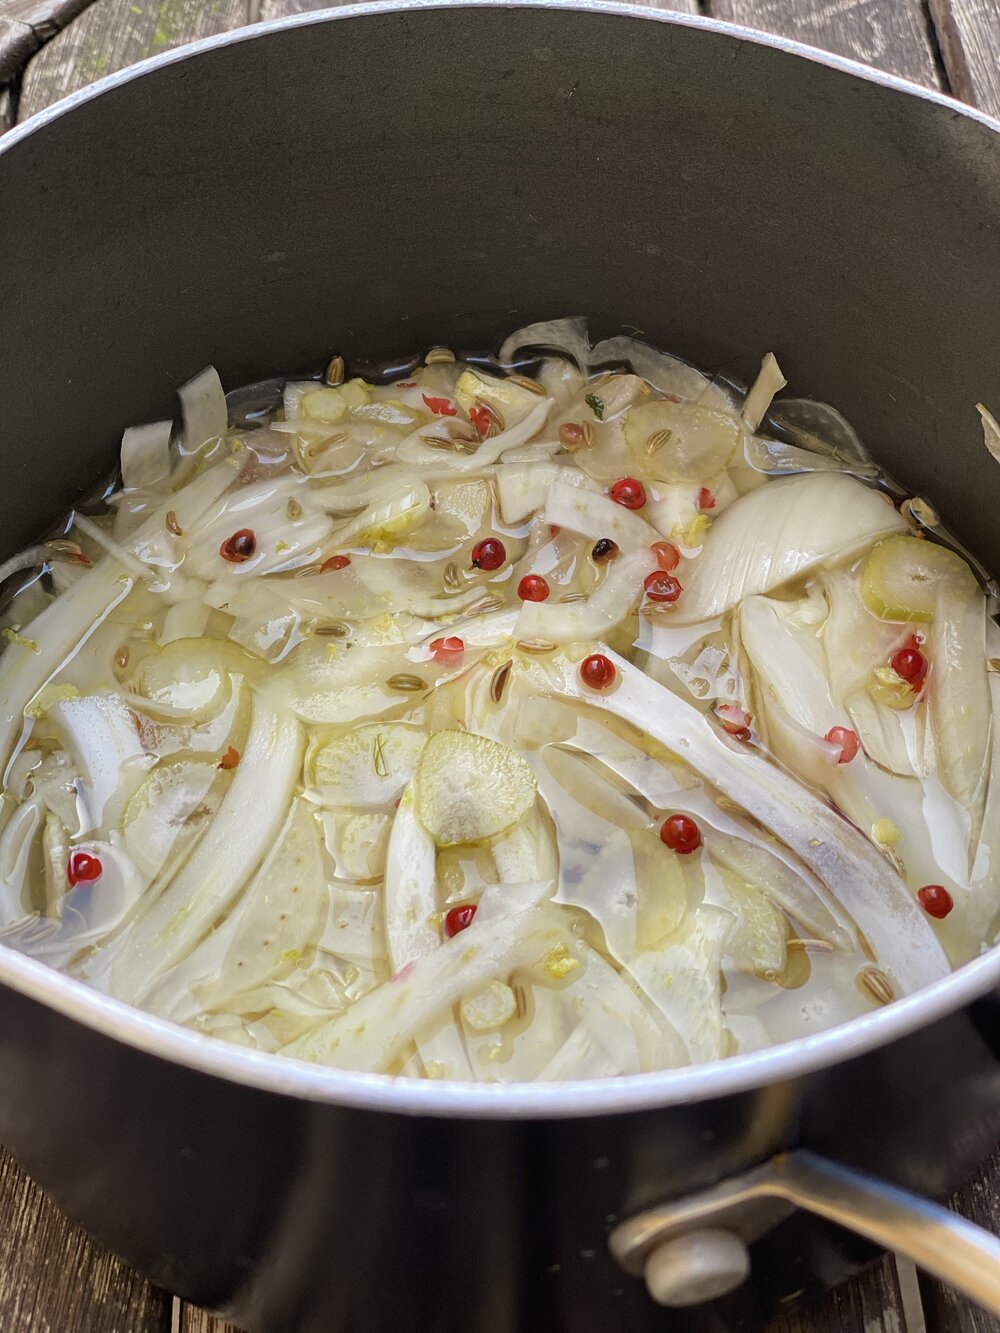 Pickled fennel with pink peppercorns to pair with the ortega wine